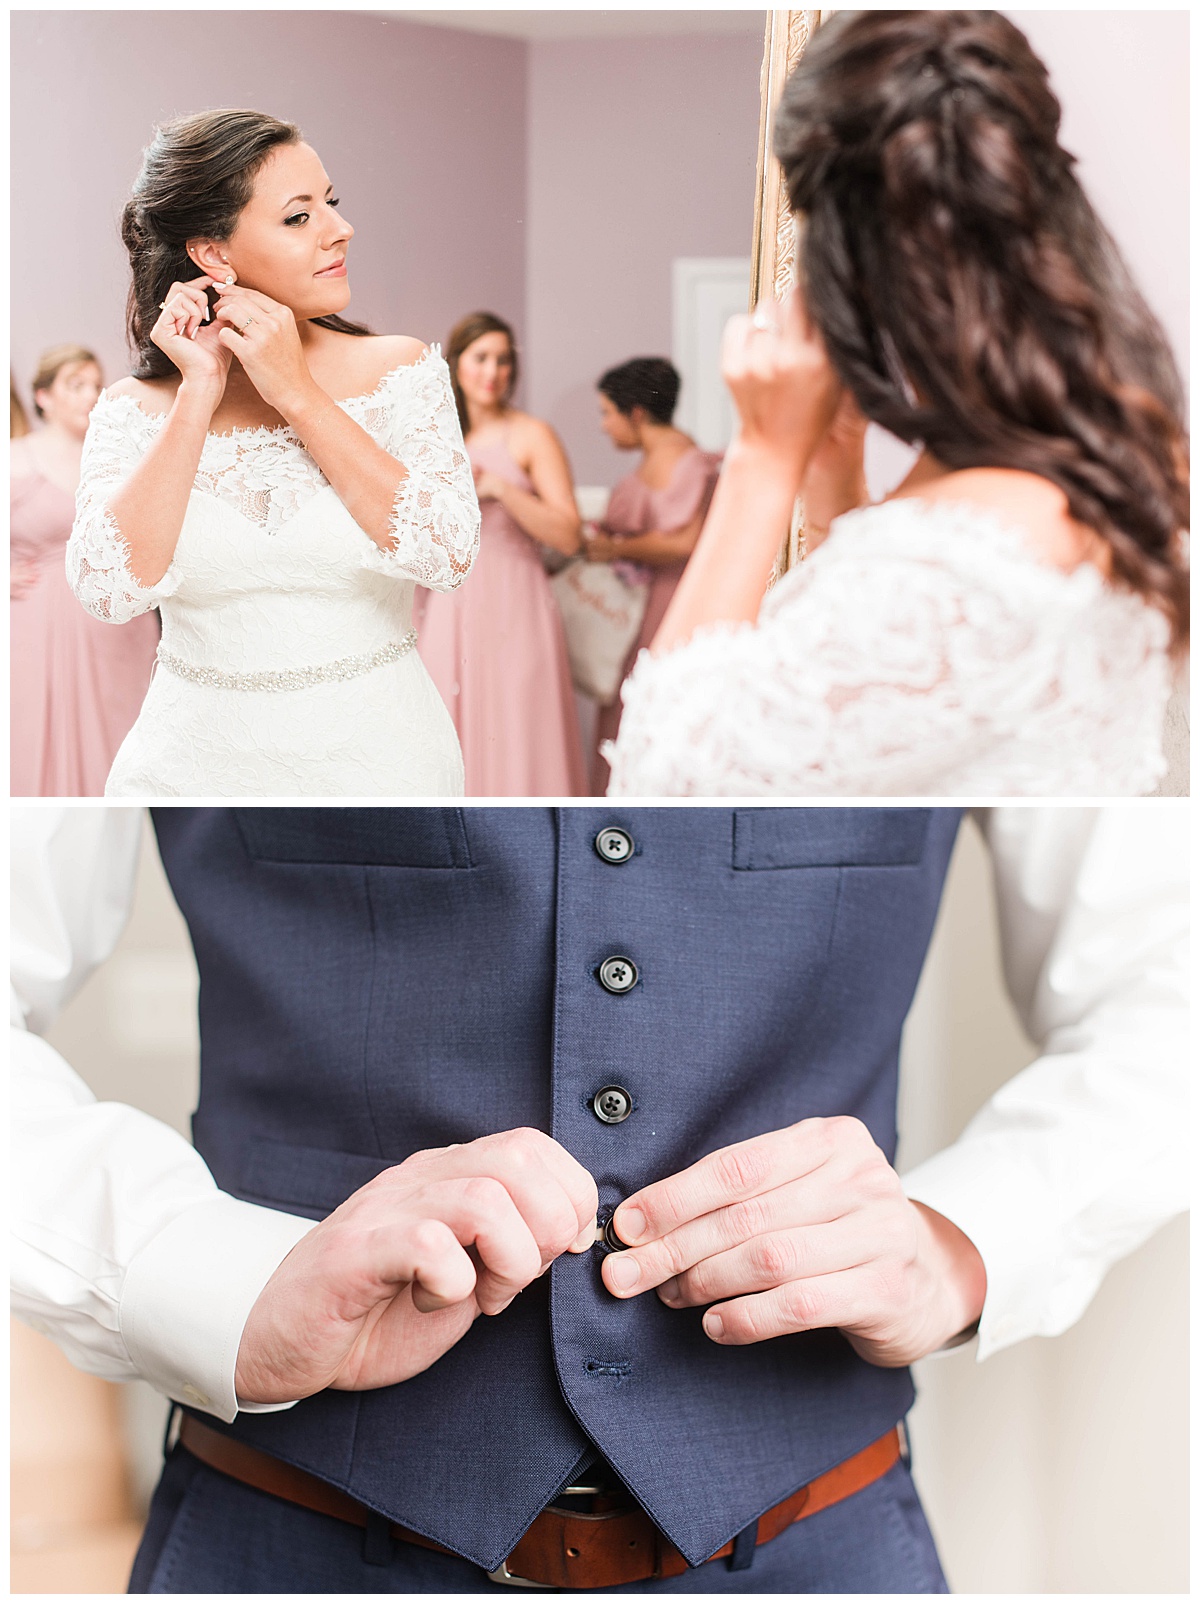 8 Chains North Winery Wedding: bride and groom getting ready, blue vest, blue suit, dusty rose bridesmaid dresses, wedding party